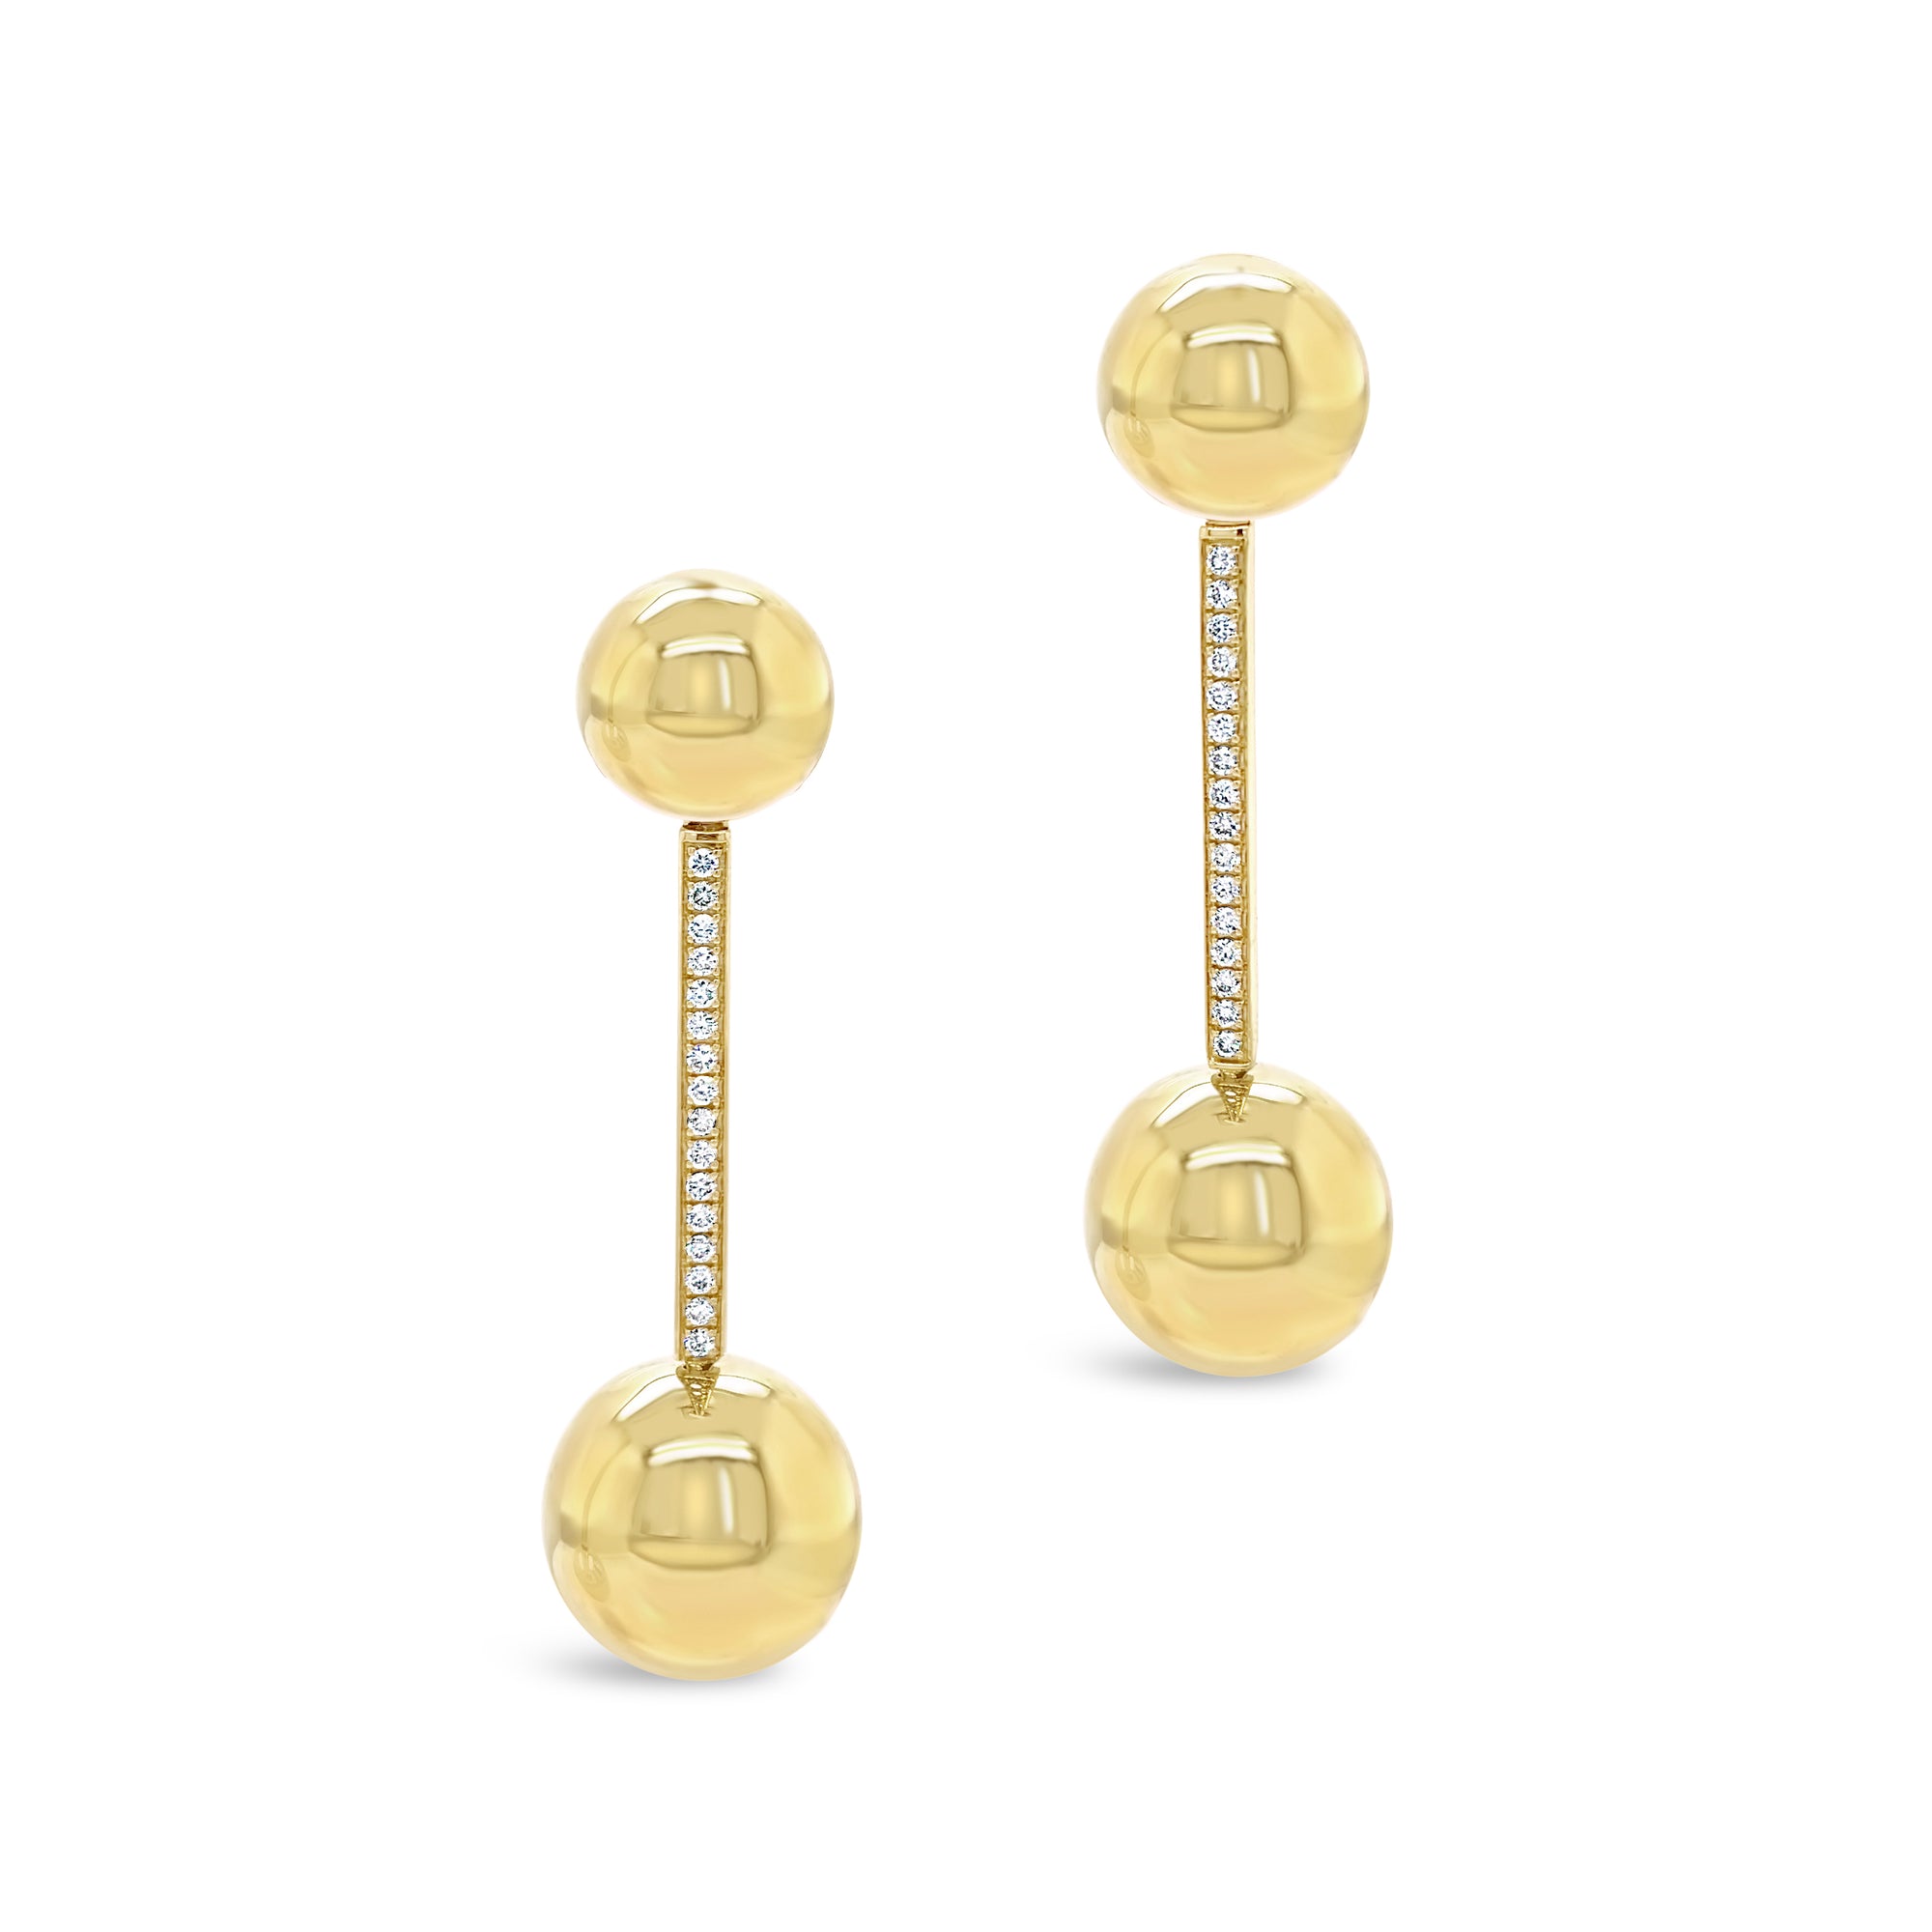 Gold Ball Drop Earrings with Diamonds  -14K gold weighing 12.50 grams  -0.30 tcw of round diamonds